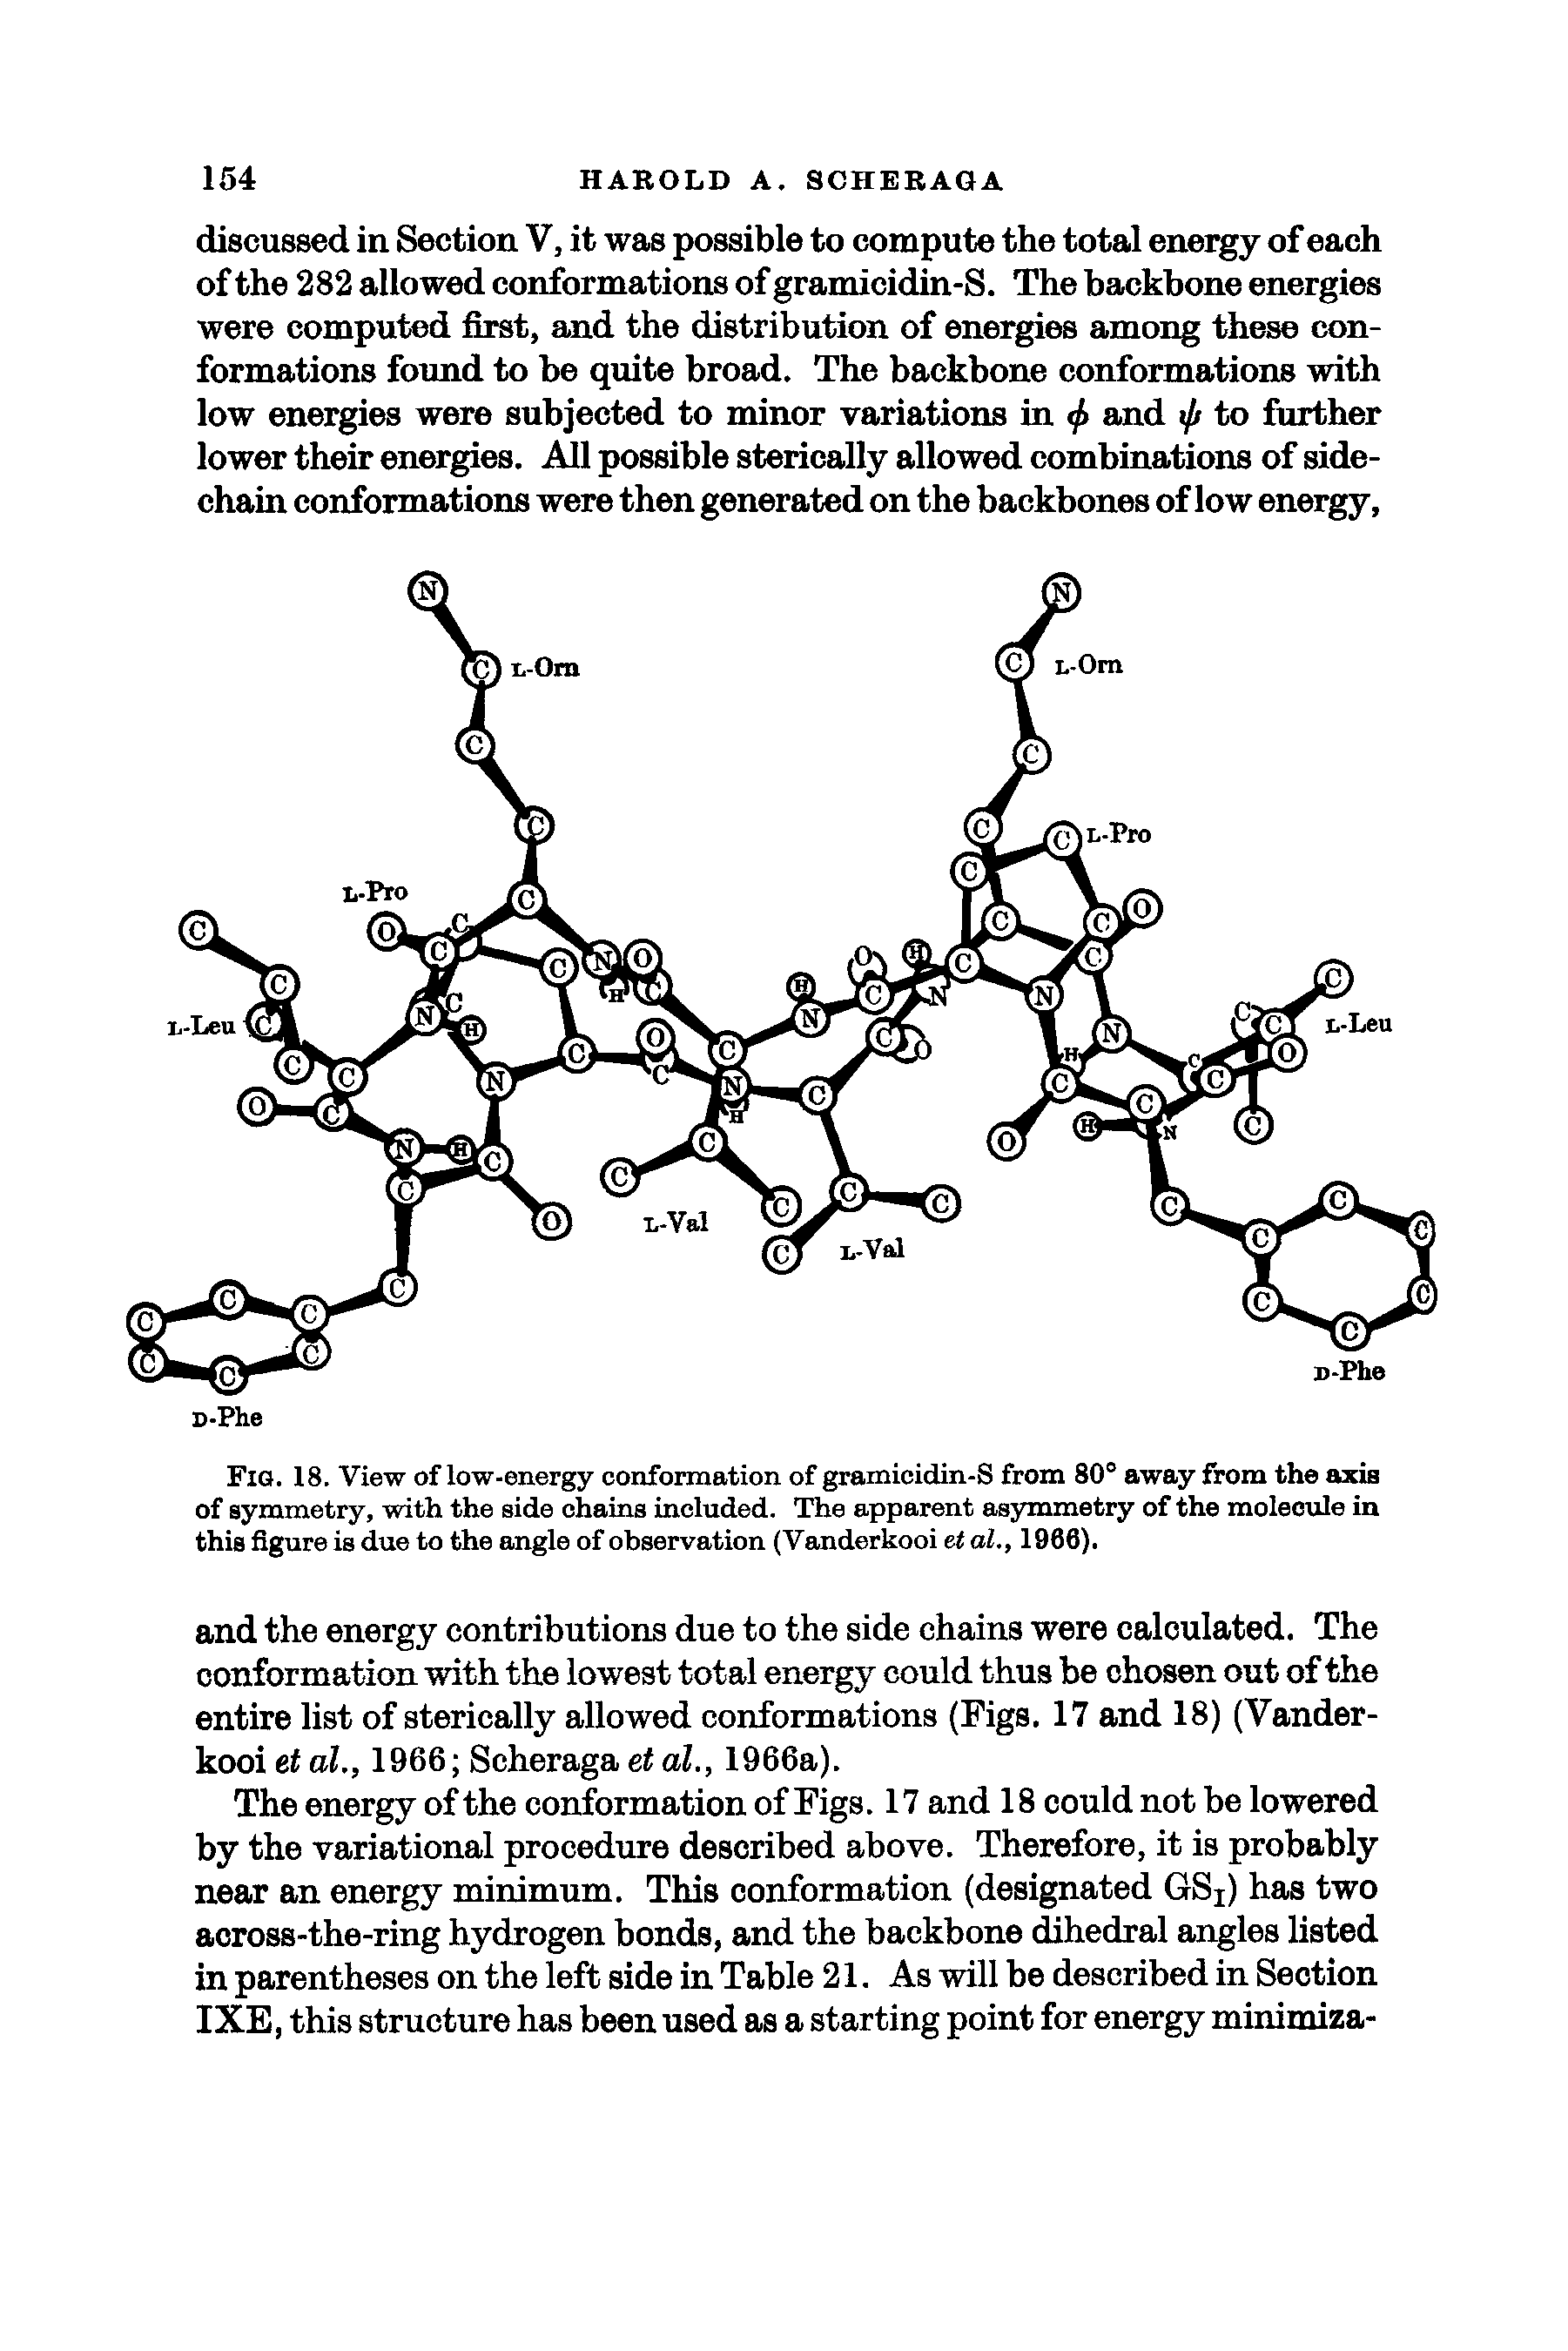 Fig. 18. View of low-energy conformation of gramicidin-S from 80° away from the axis of symmetry, with the side chains included. The apparent asymmetry of the molecule in this figure is due to the angle of observation (Vanderkooi et al., 1966).